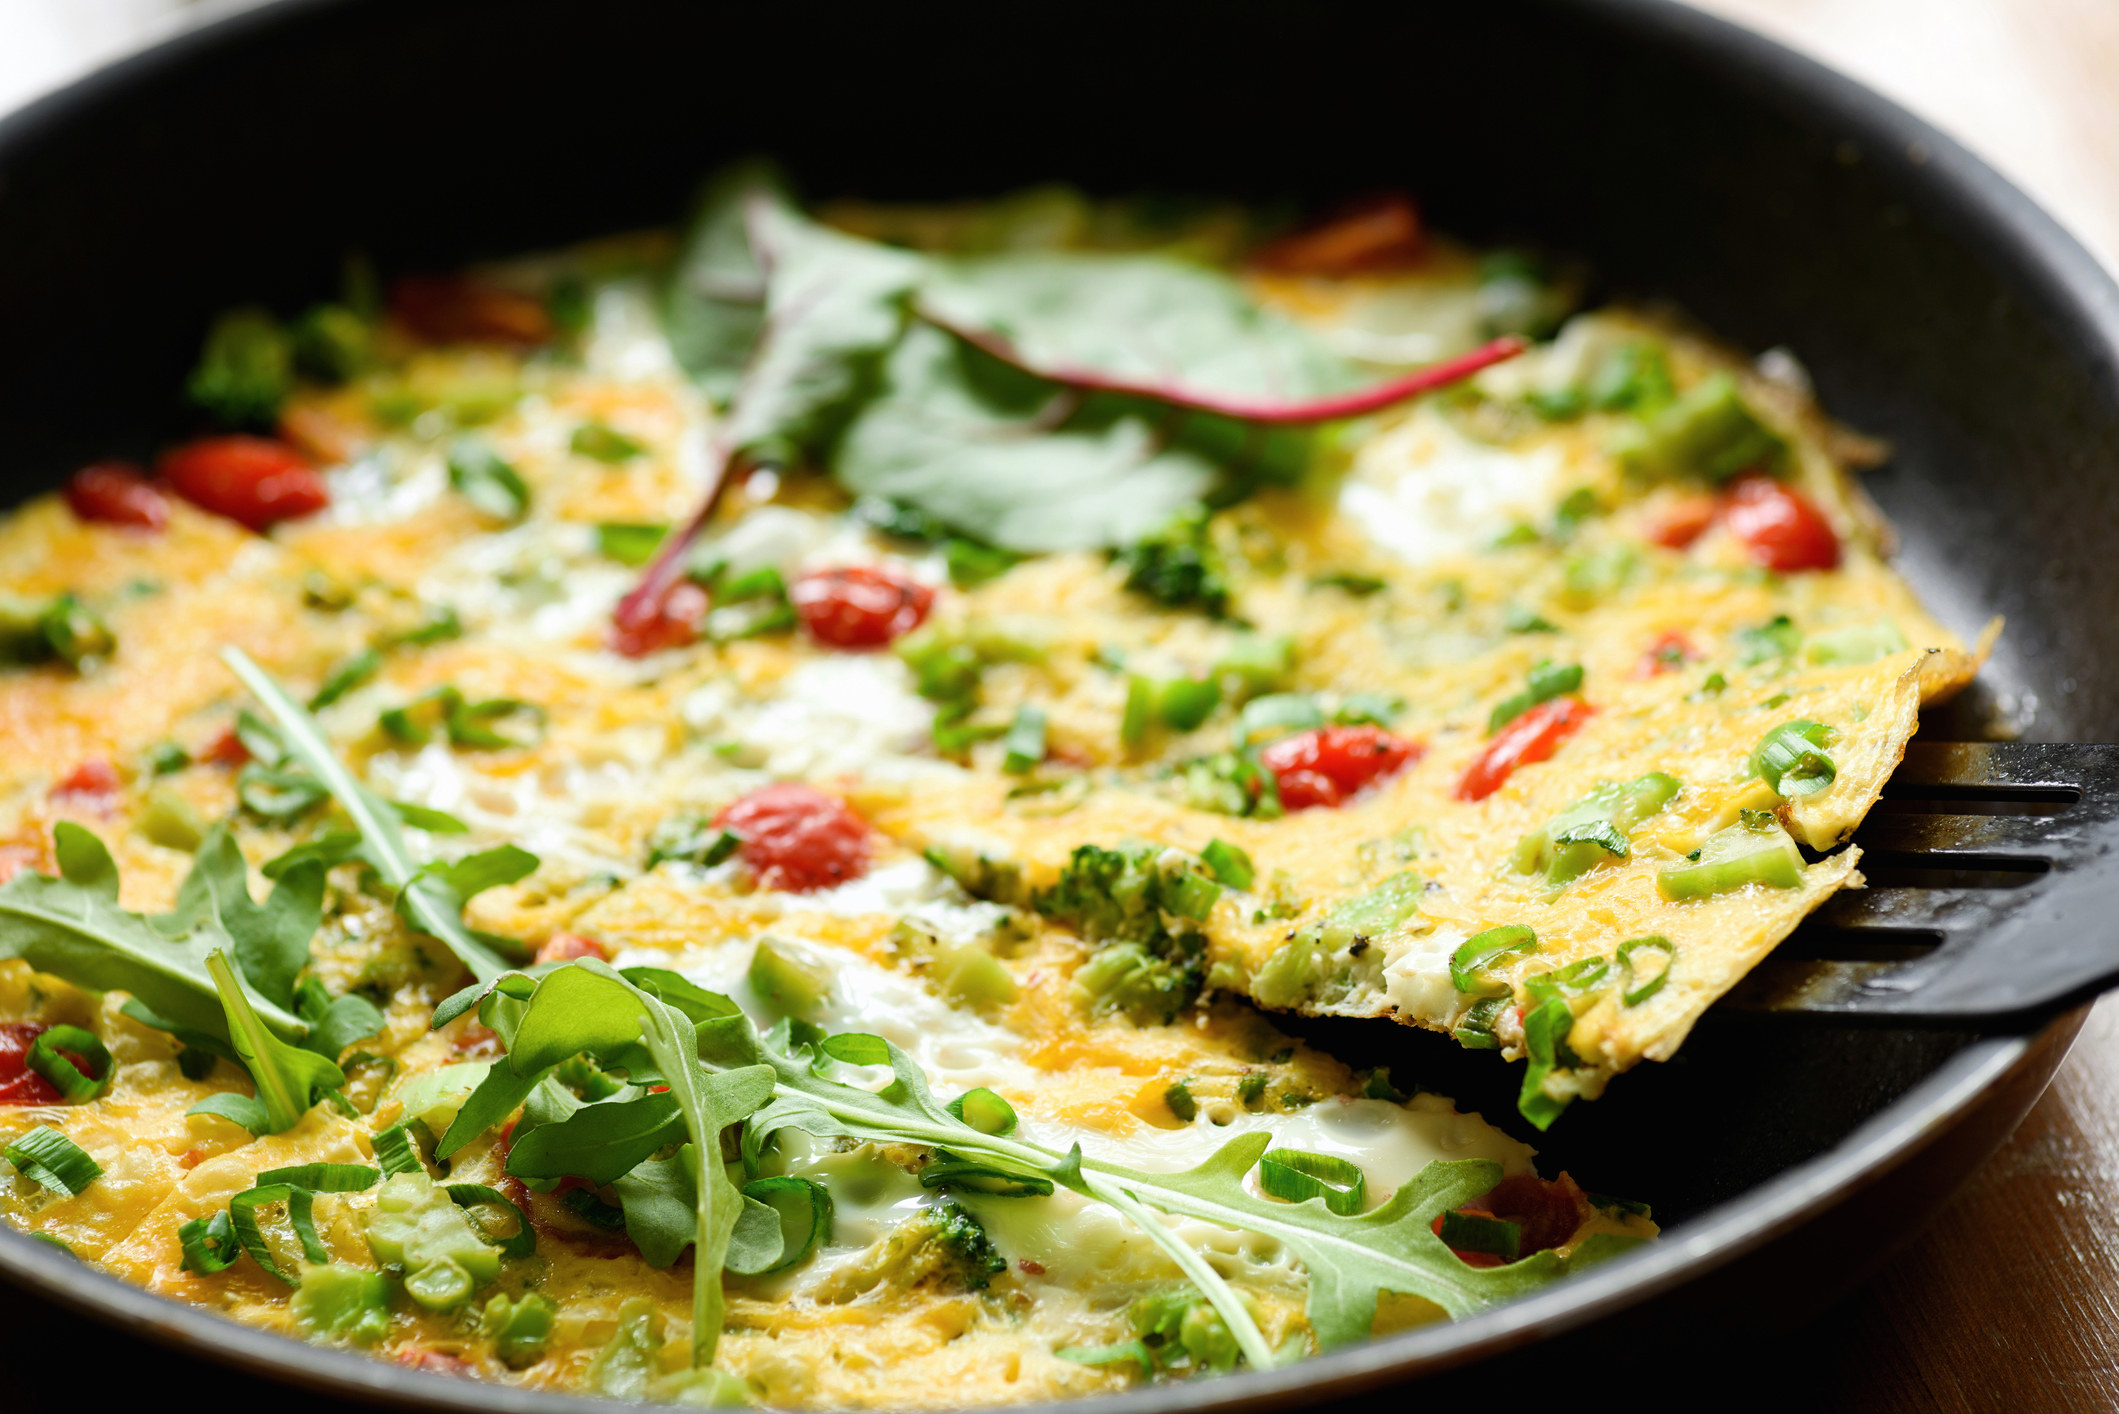 A frittata with cherry tomatoes, greens and cheese.